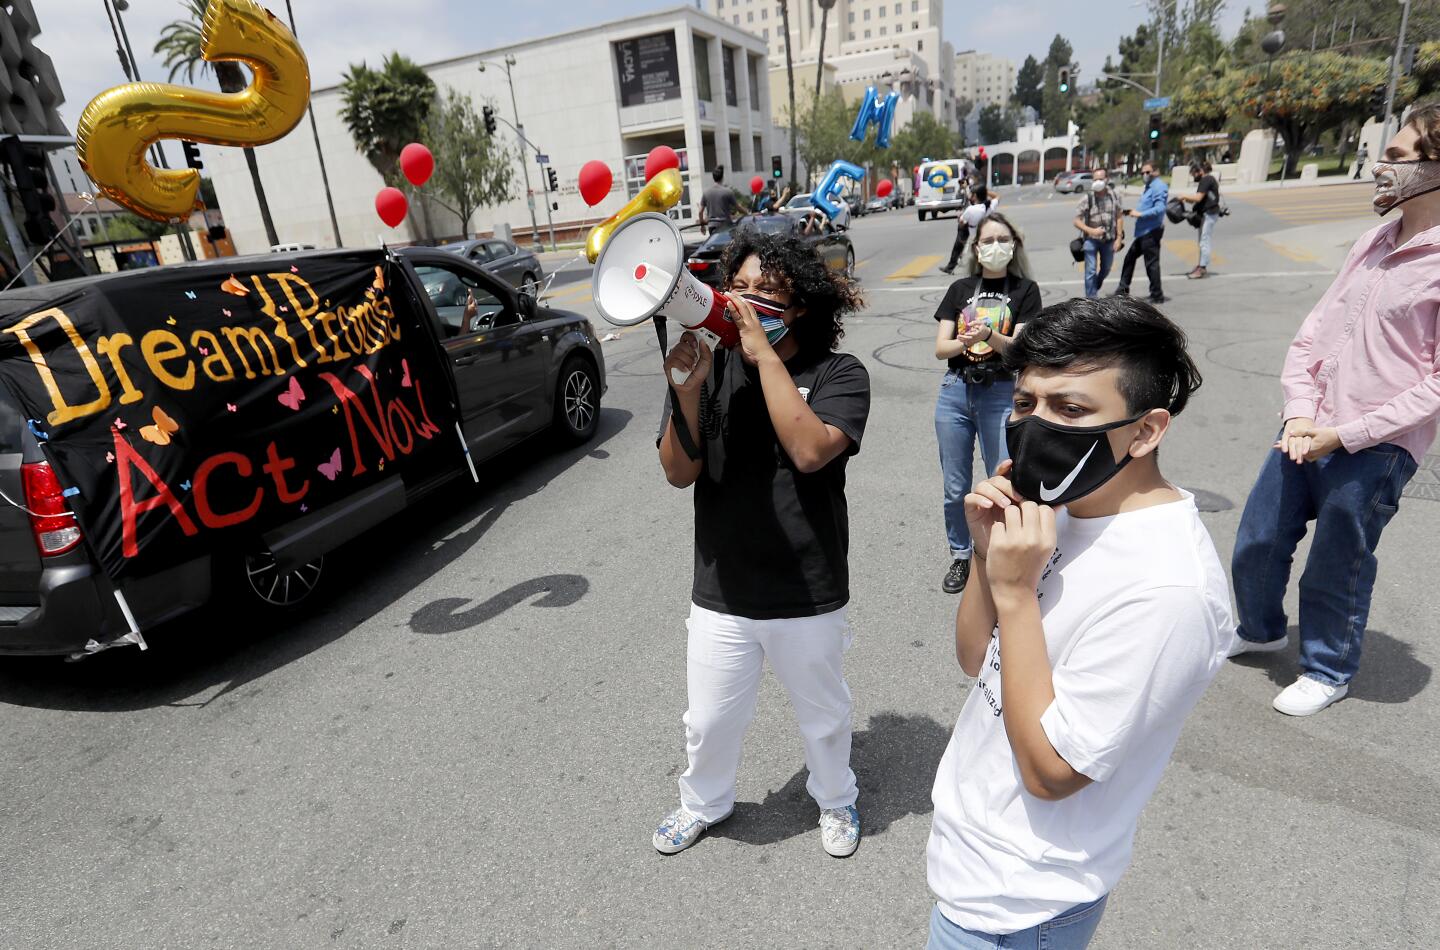 "Dreamers" and their supporters stage a celebratory car caravan around MacArthur Park in Los Angeles.